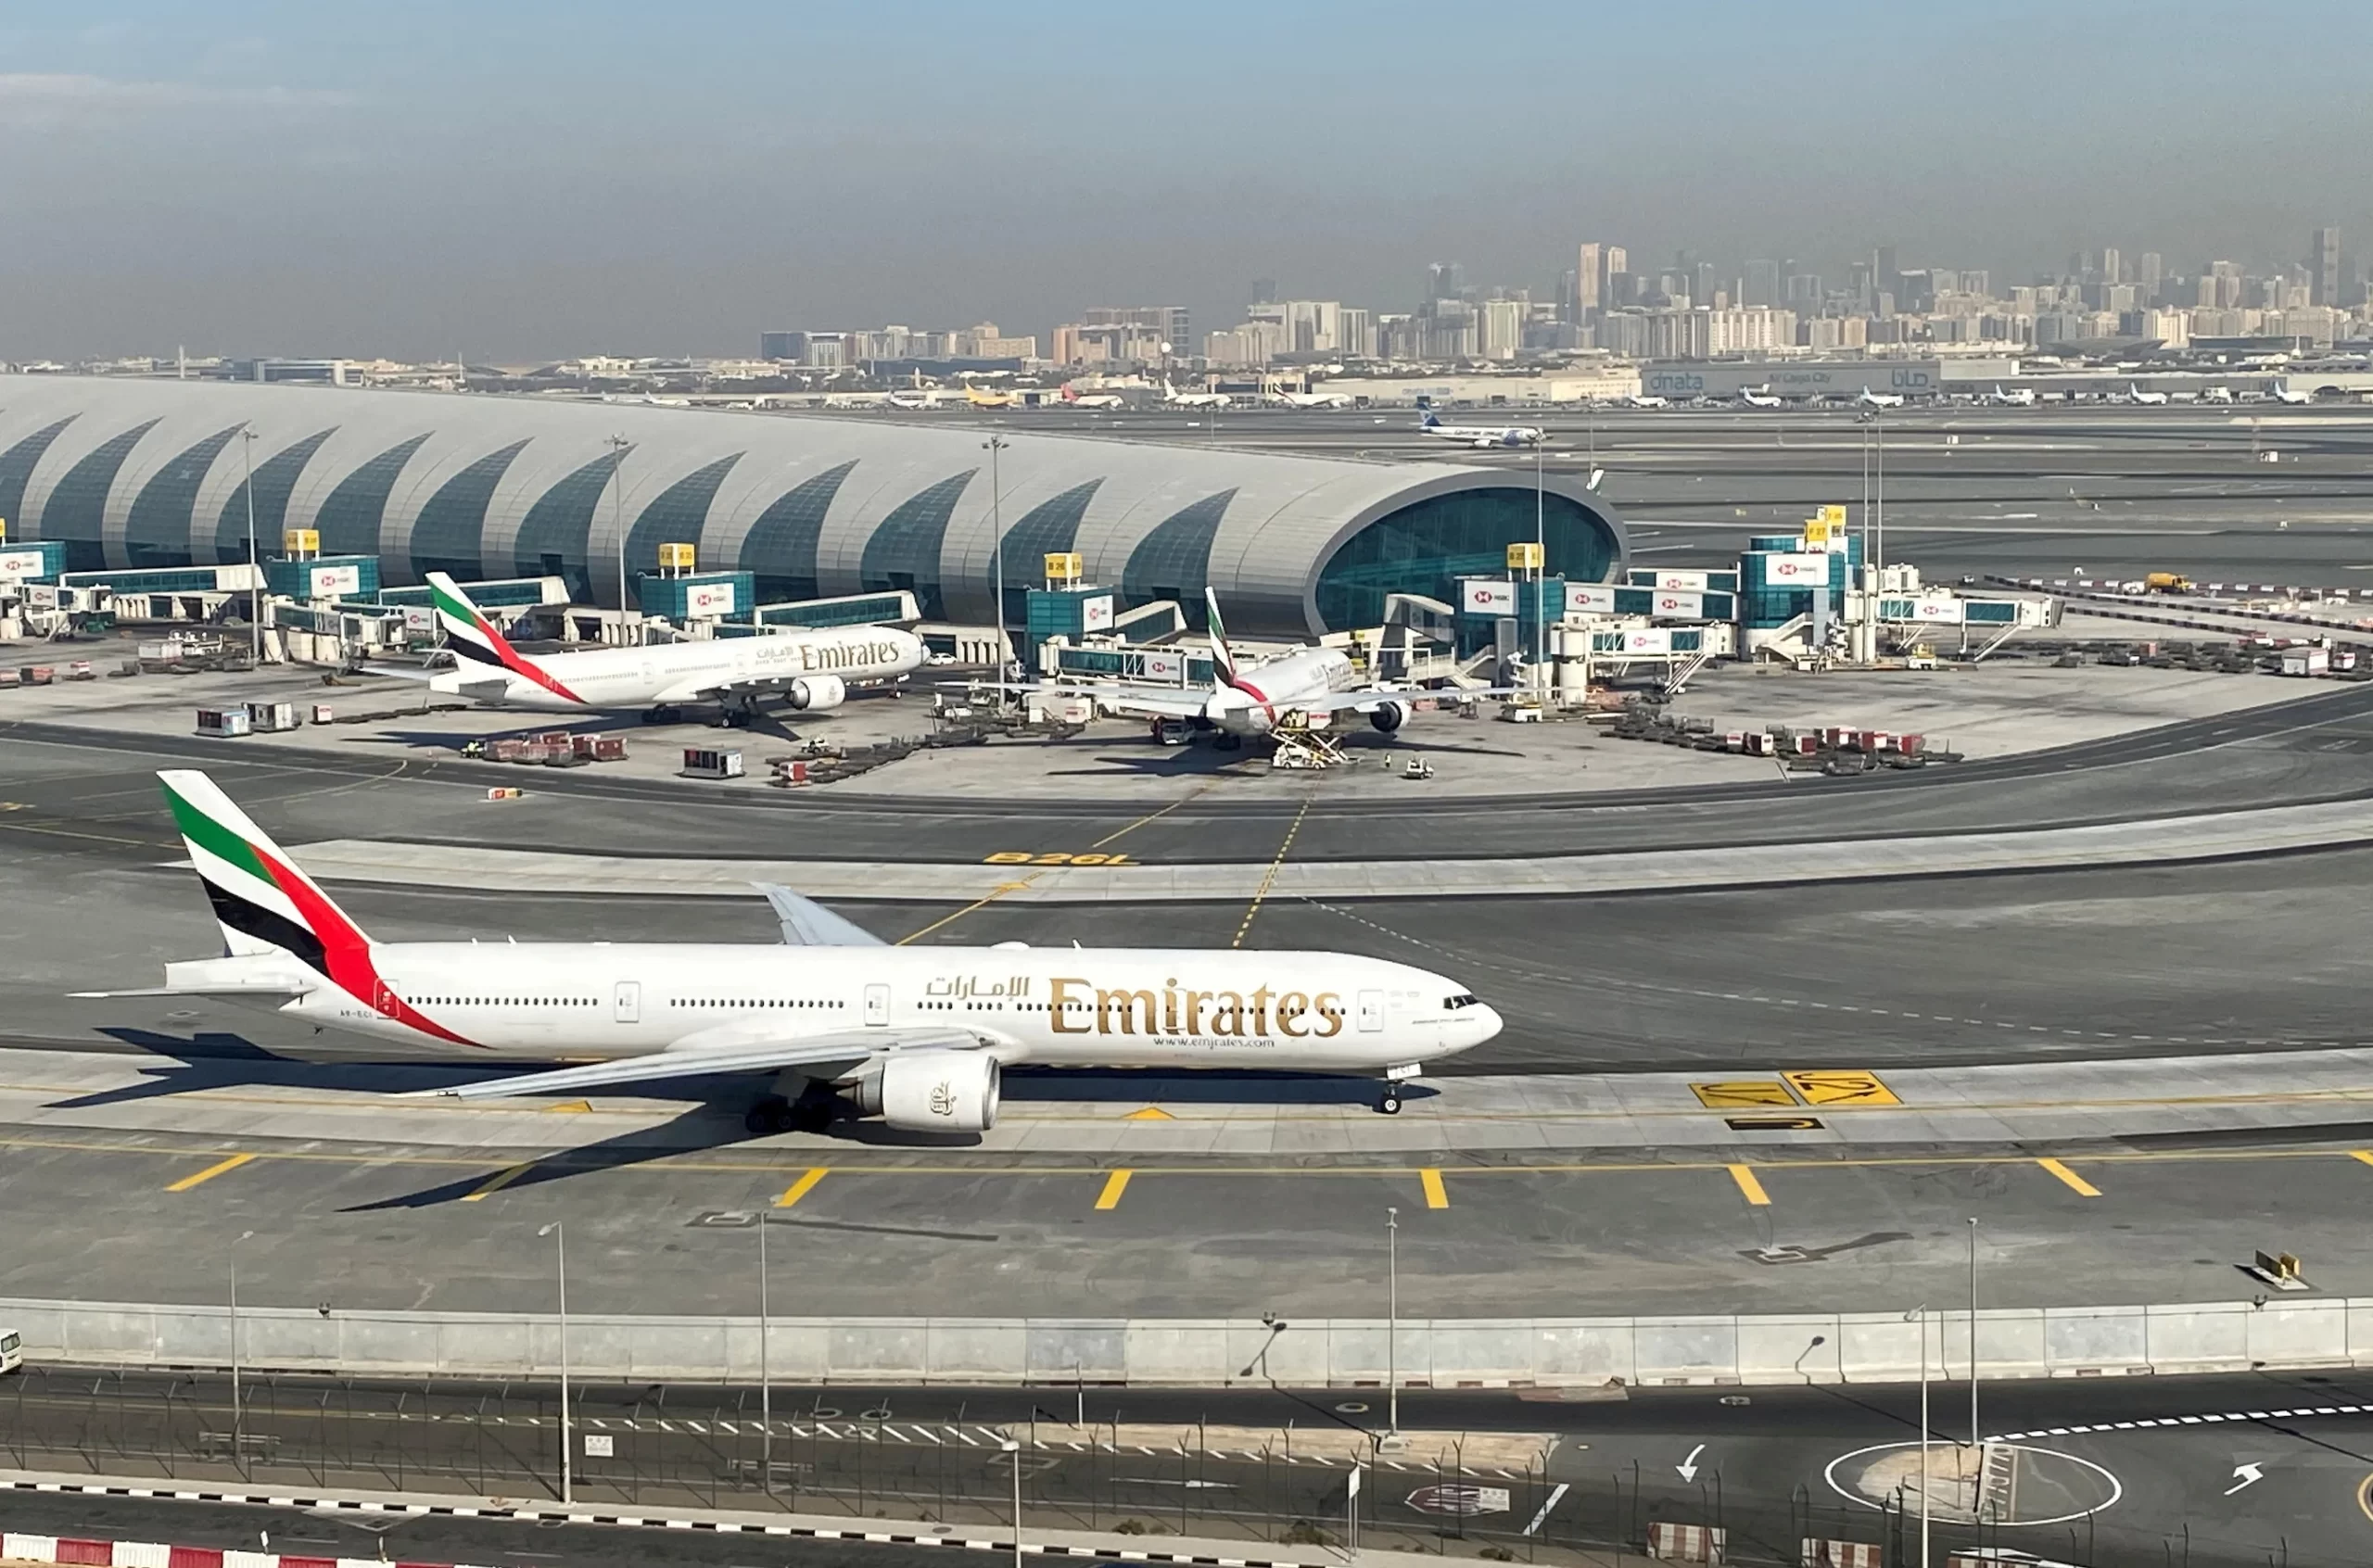 Top 5 Dubai Airports: Which One Should You Choose?